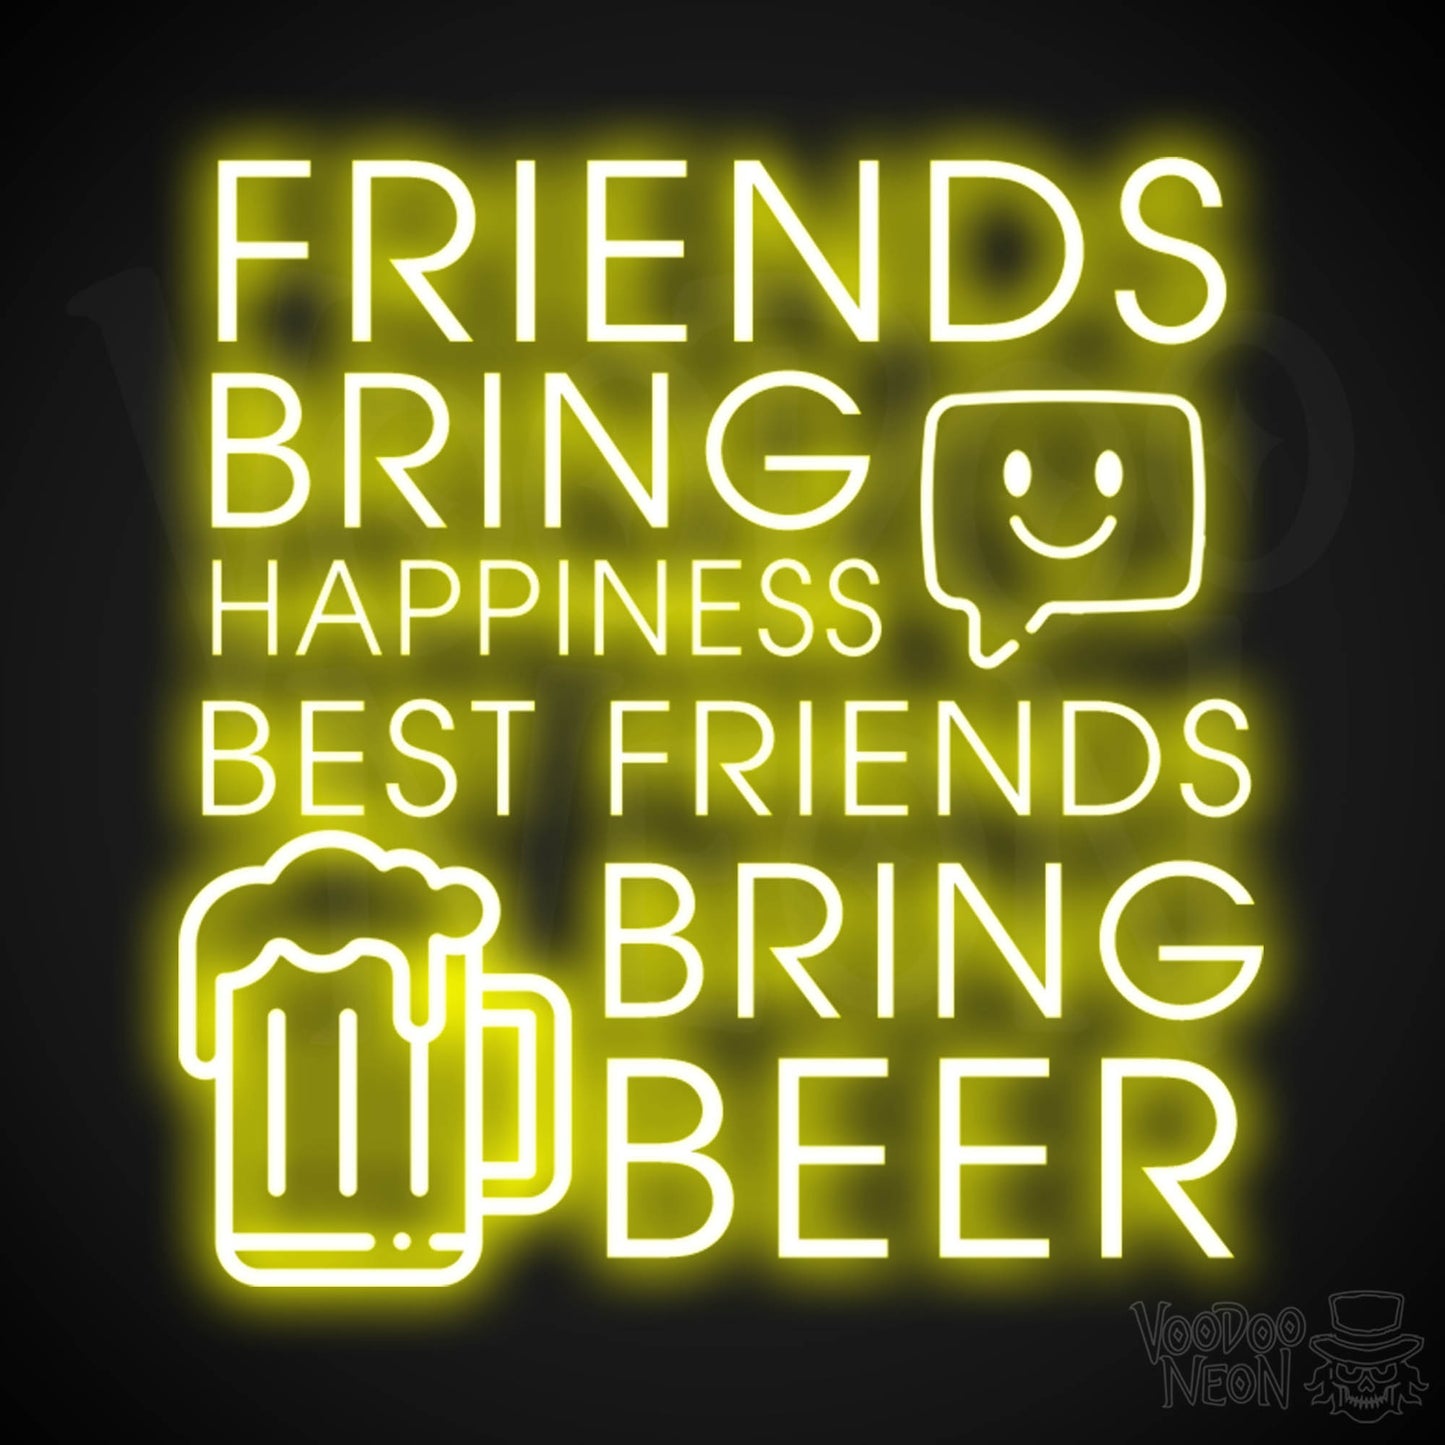 Friends Bring Happiness Best Friends Bring Beer Neon Sign - LED Lights Wall Art - Color Yellow